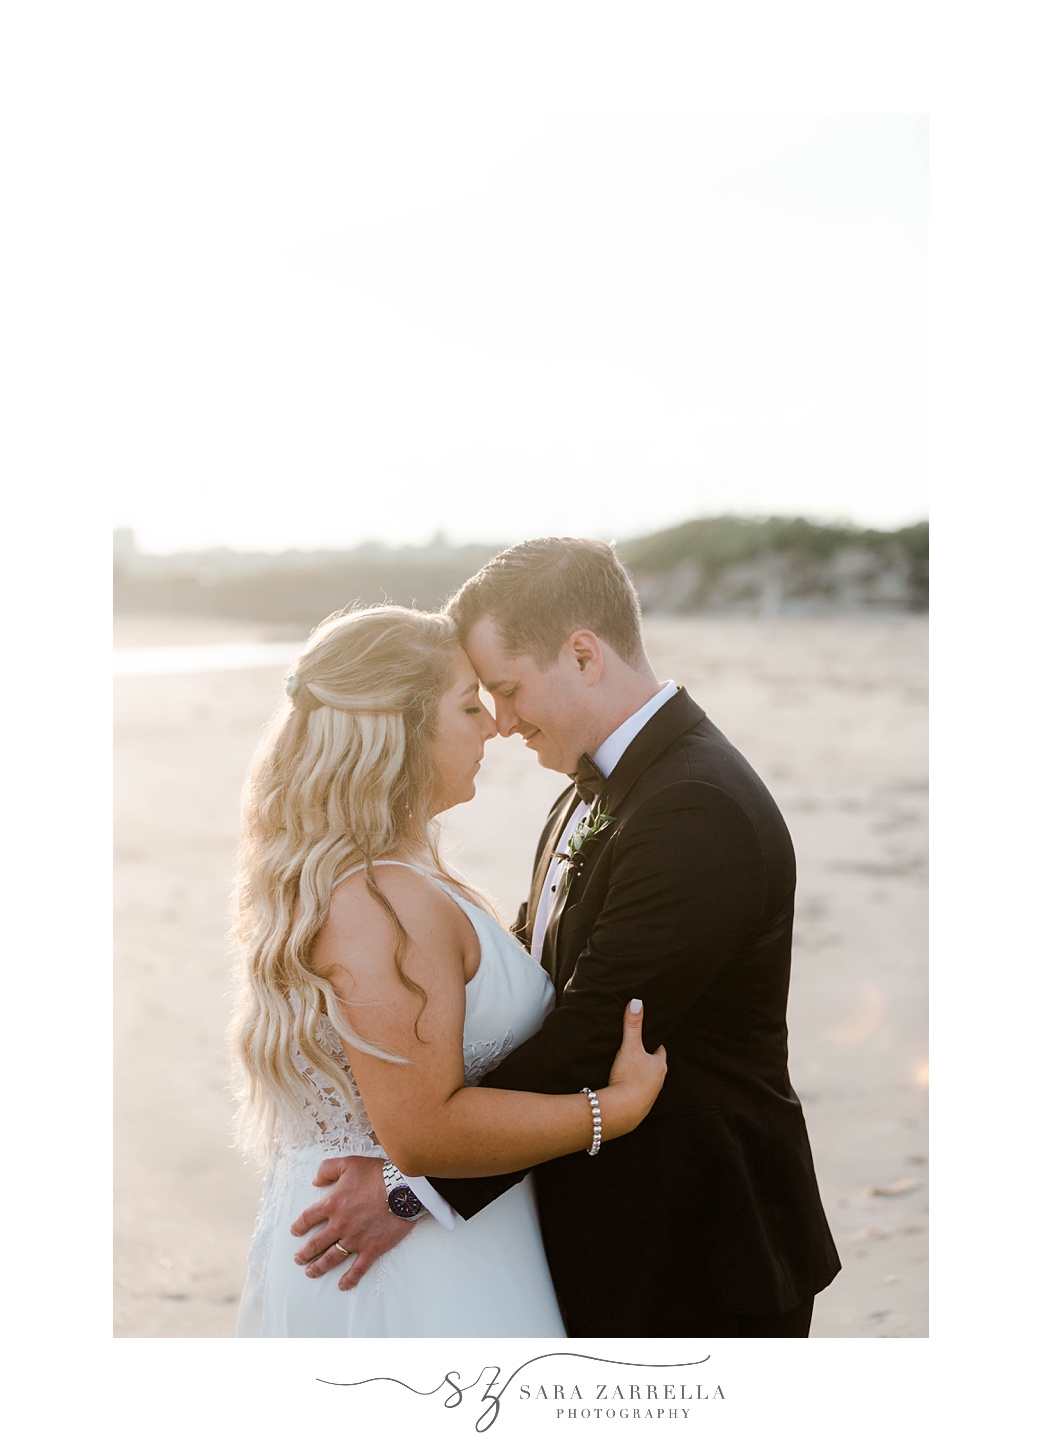 bride and groom lean foreheads together on beach at sunset